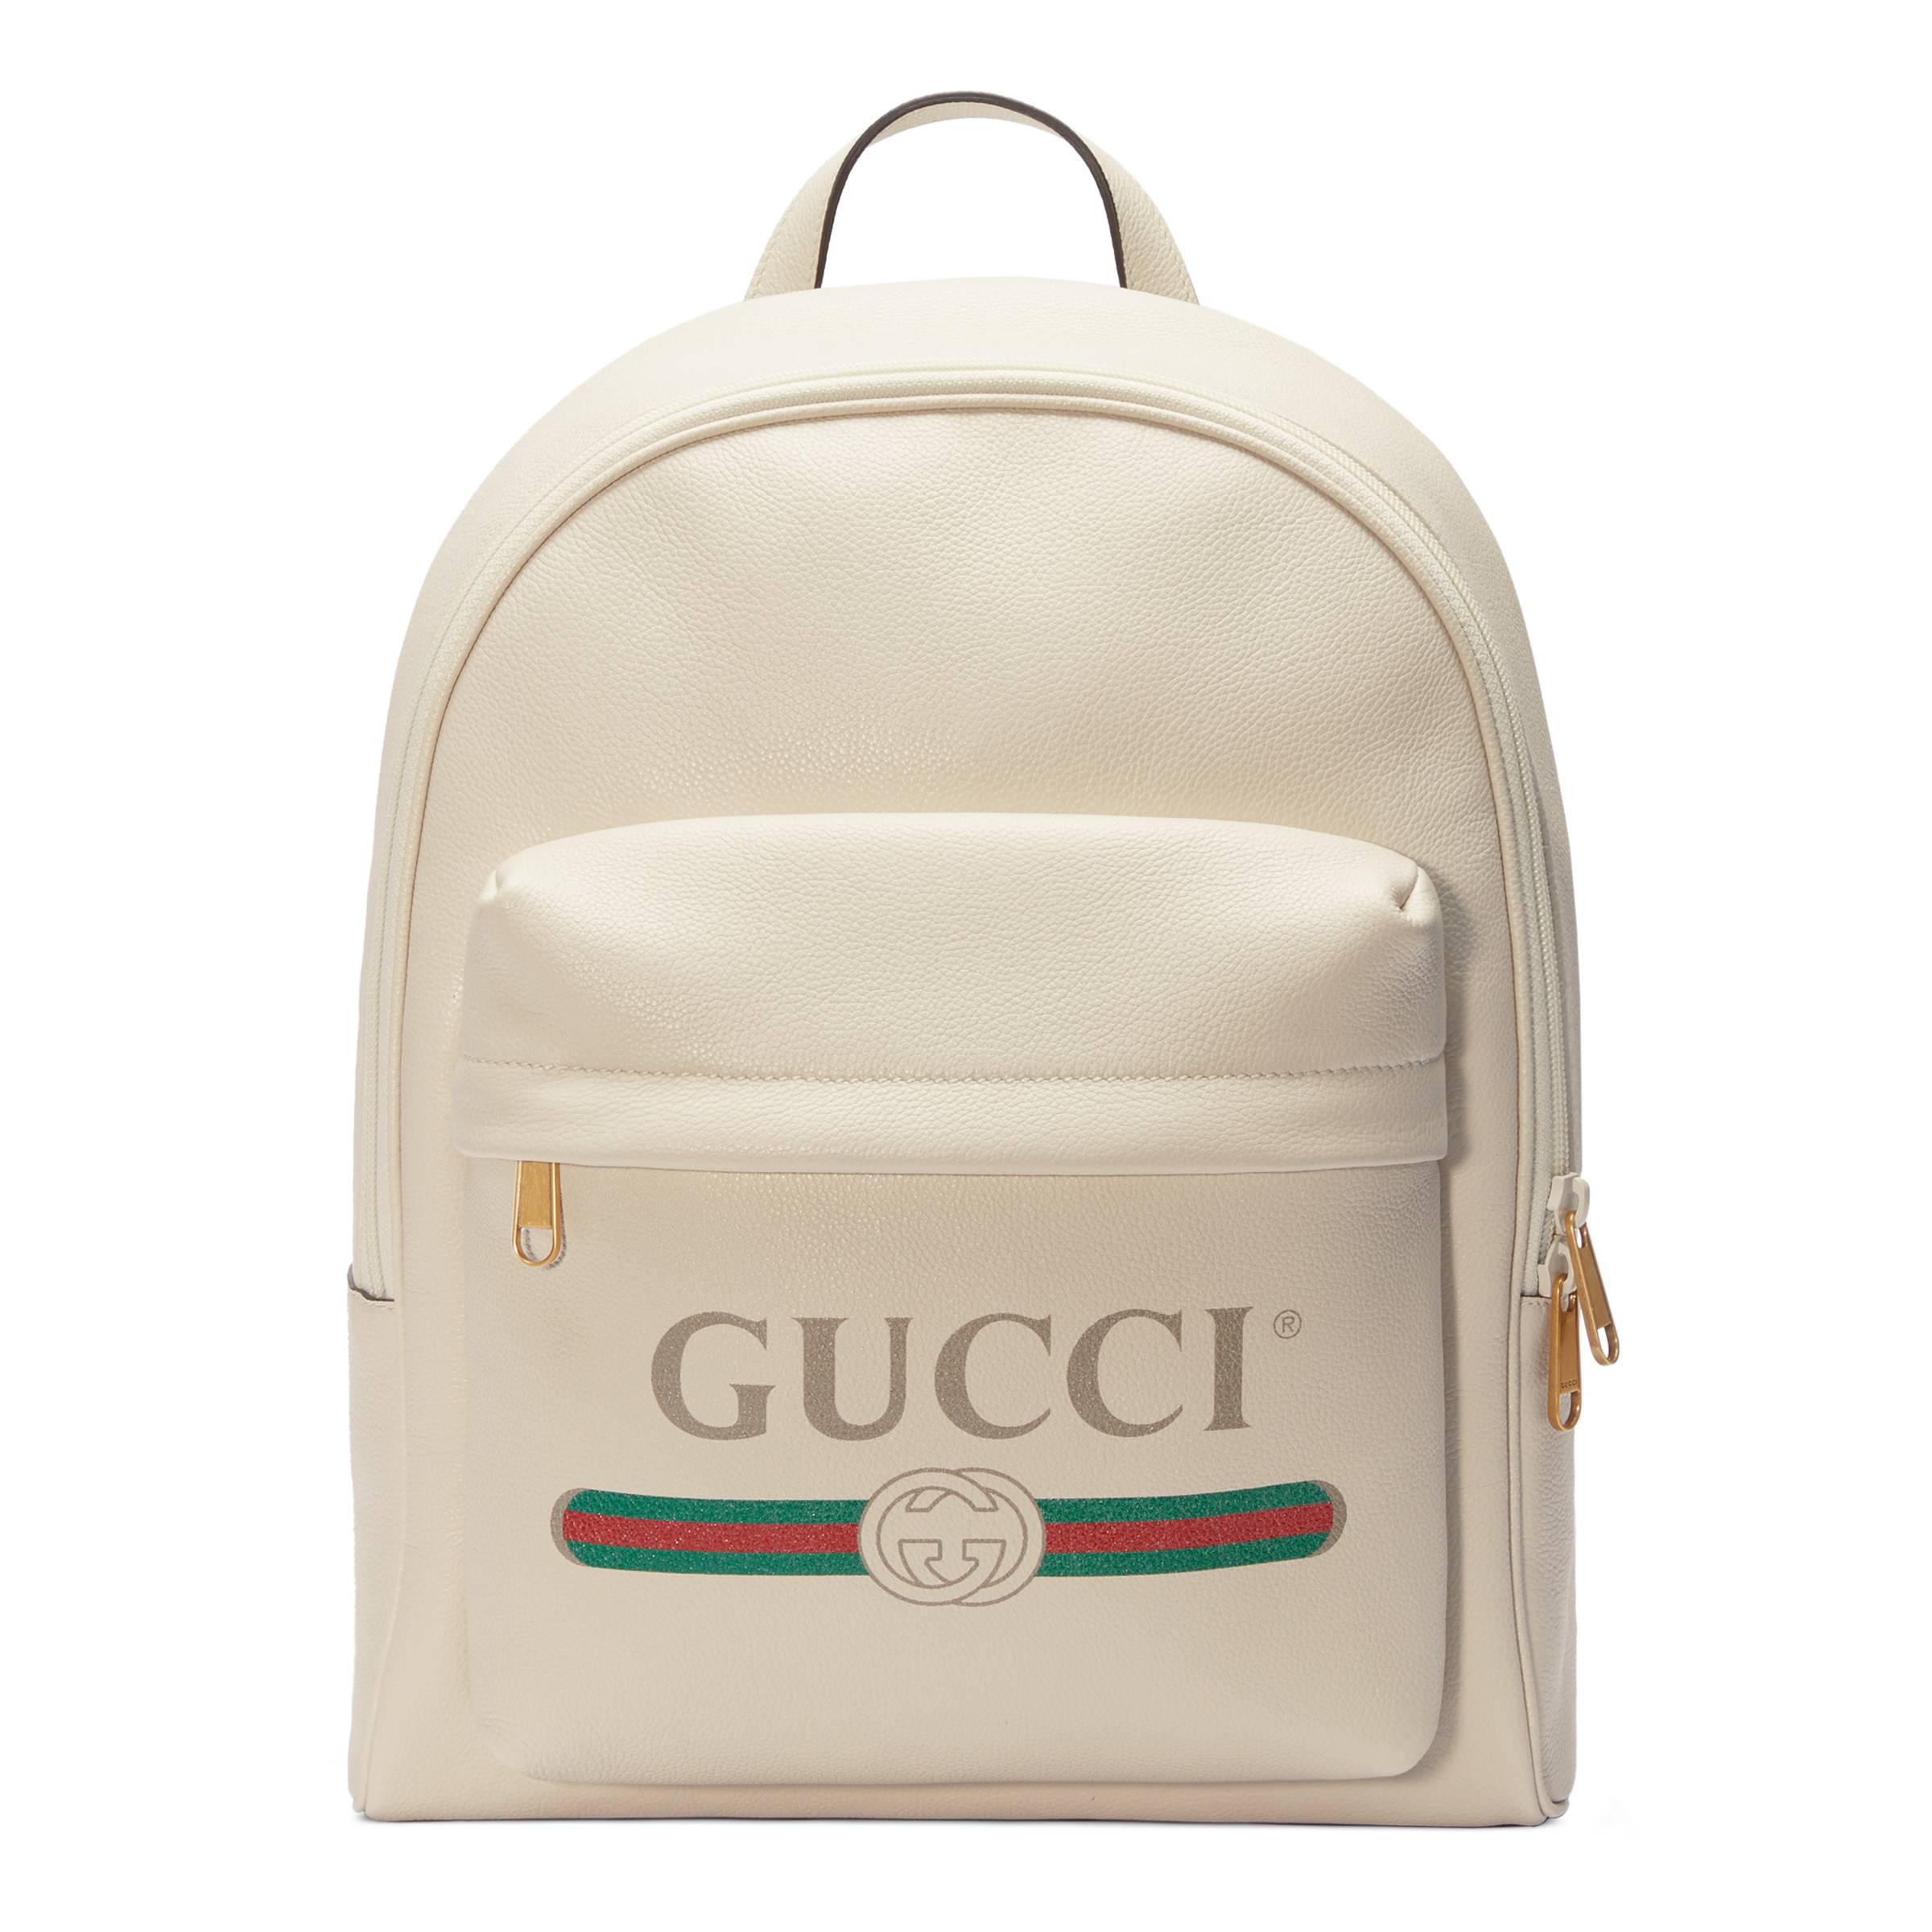 Gucci Print Leather Backpack in White - Lyst